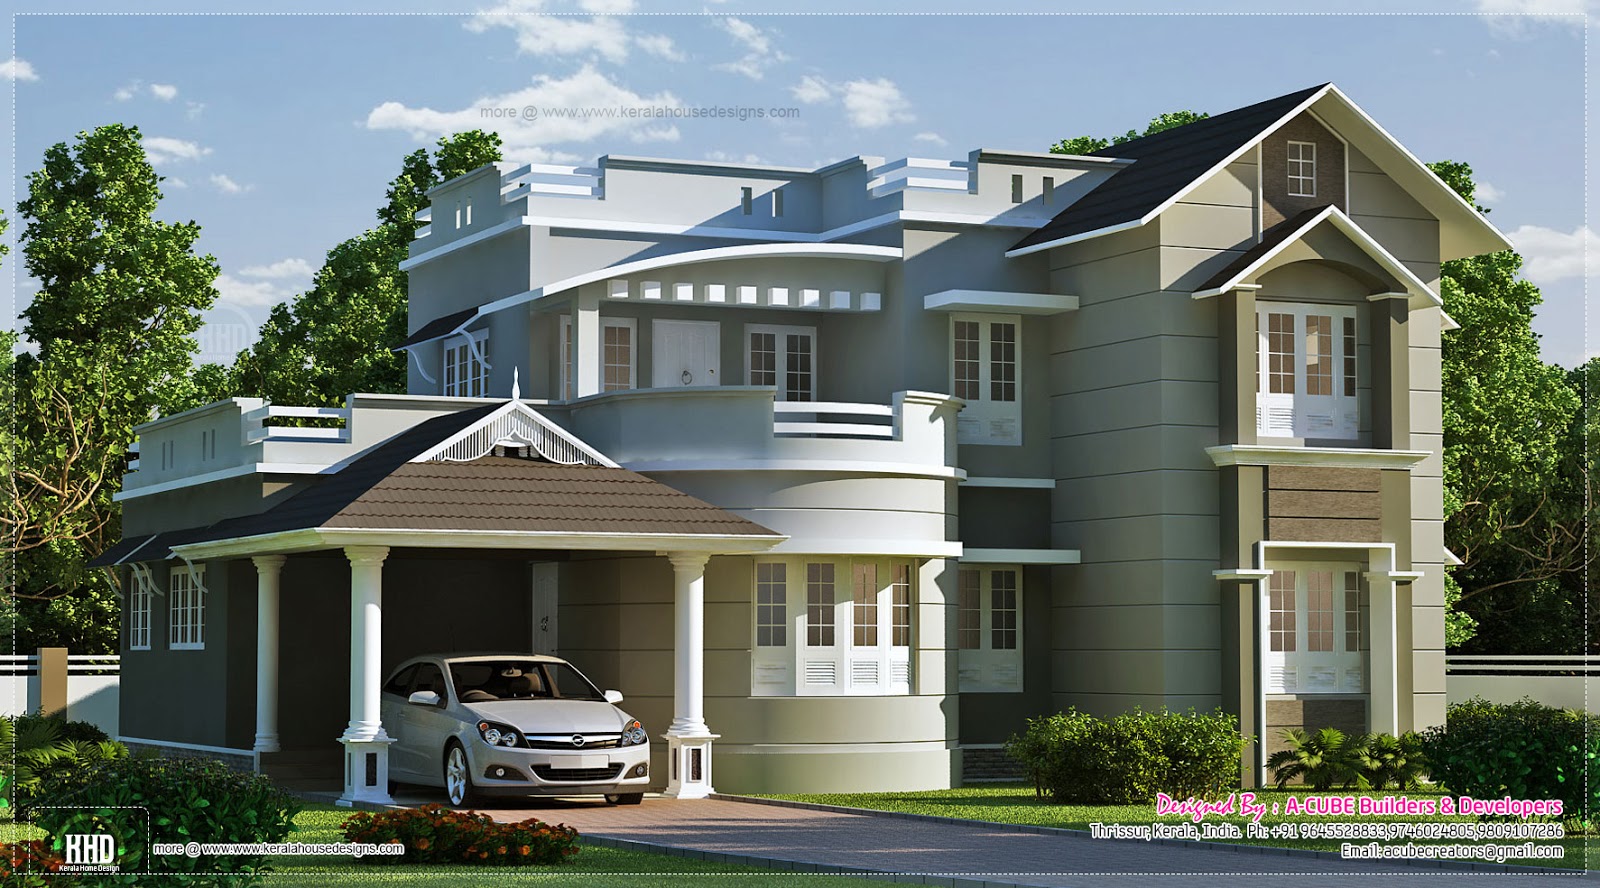  New  style  home  exterior in 1800 sq feet Home  Kerala  Plans 